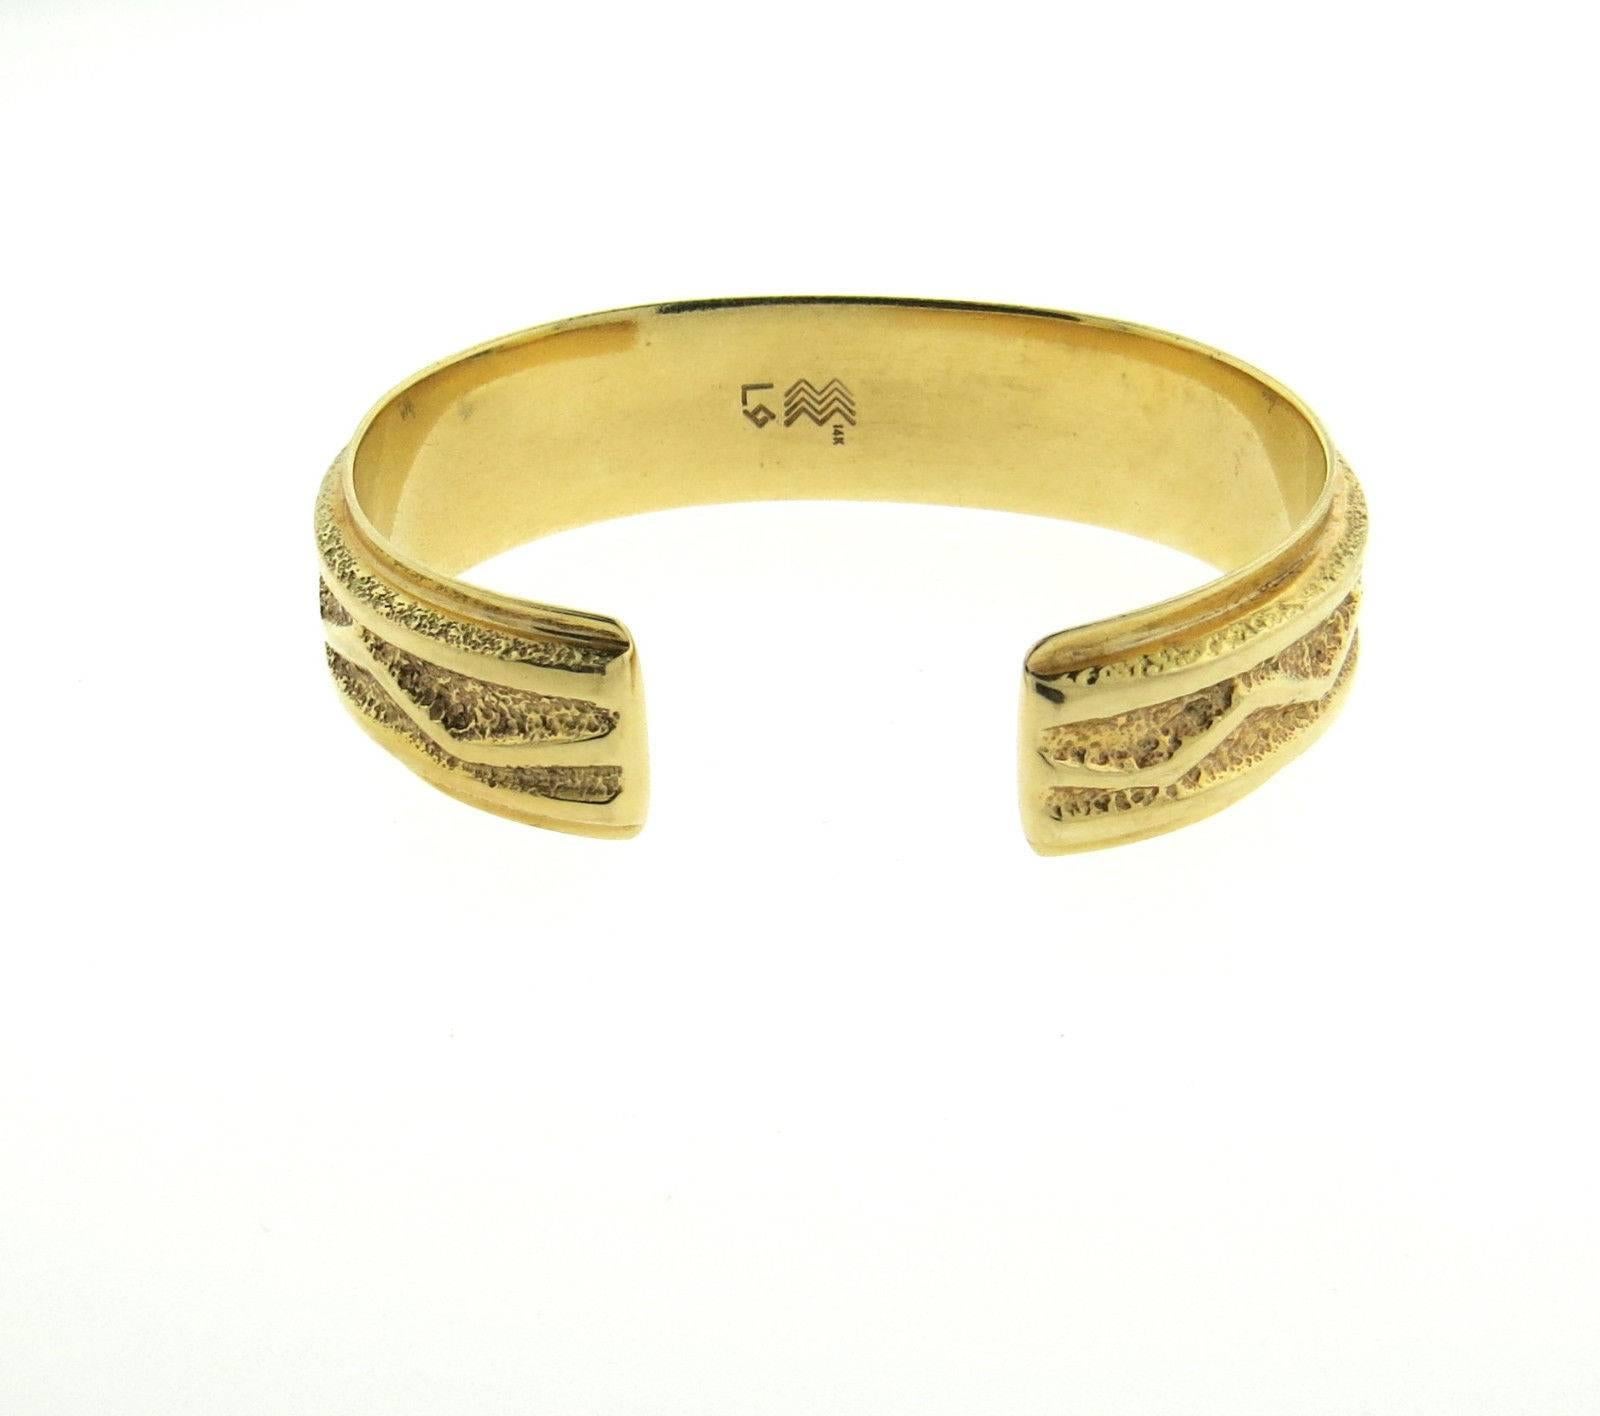 A 14k yellow gold cuff bracelet by Larry Golsh.  The bracelet will fit up to 6